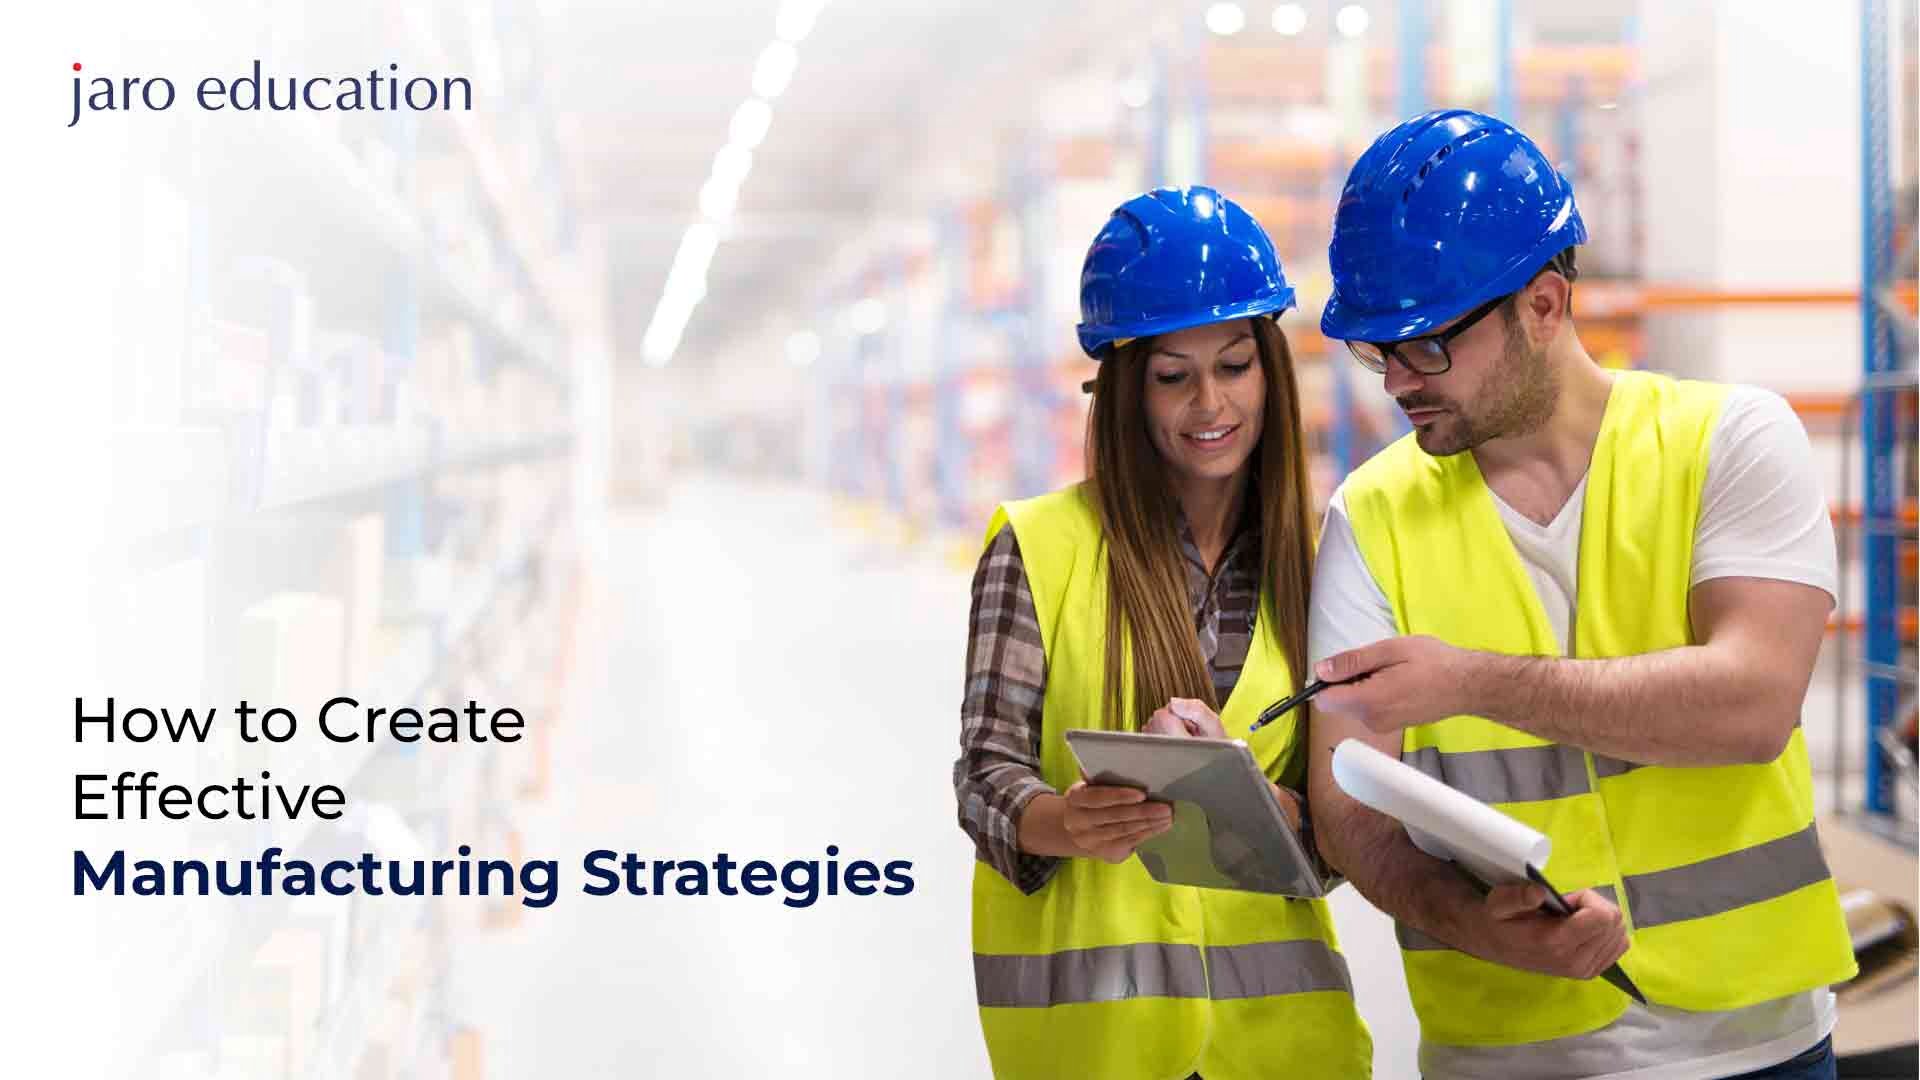 How-to-Create-Effective-Manufacturing-Strategies_27_11zon jaro